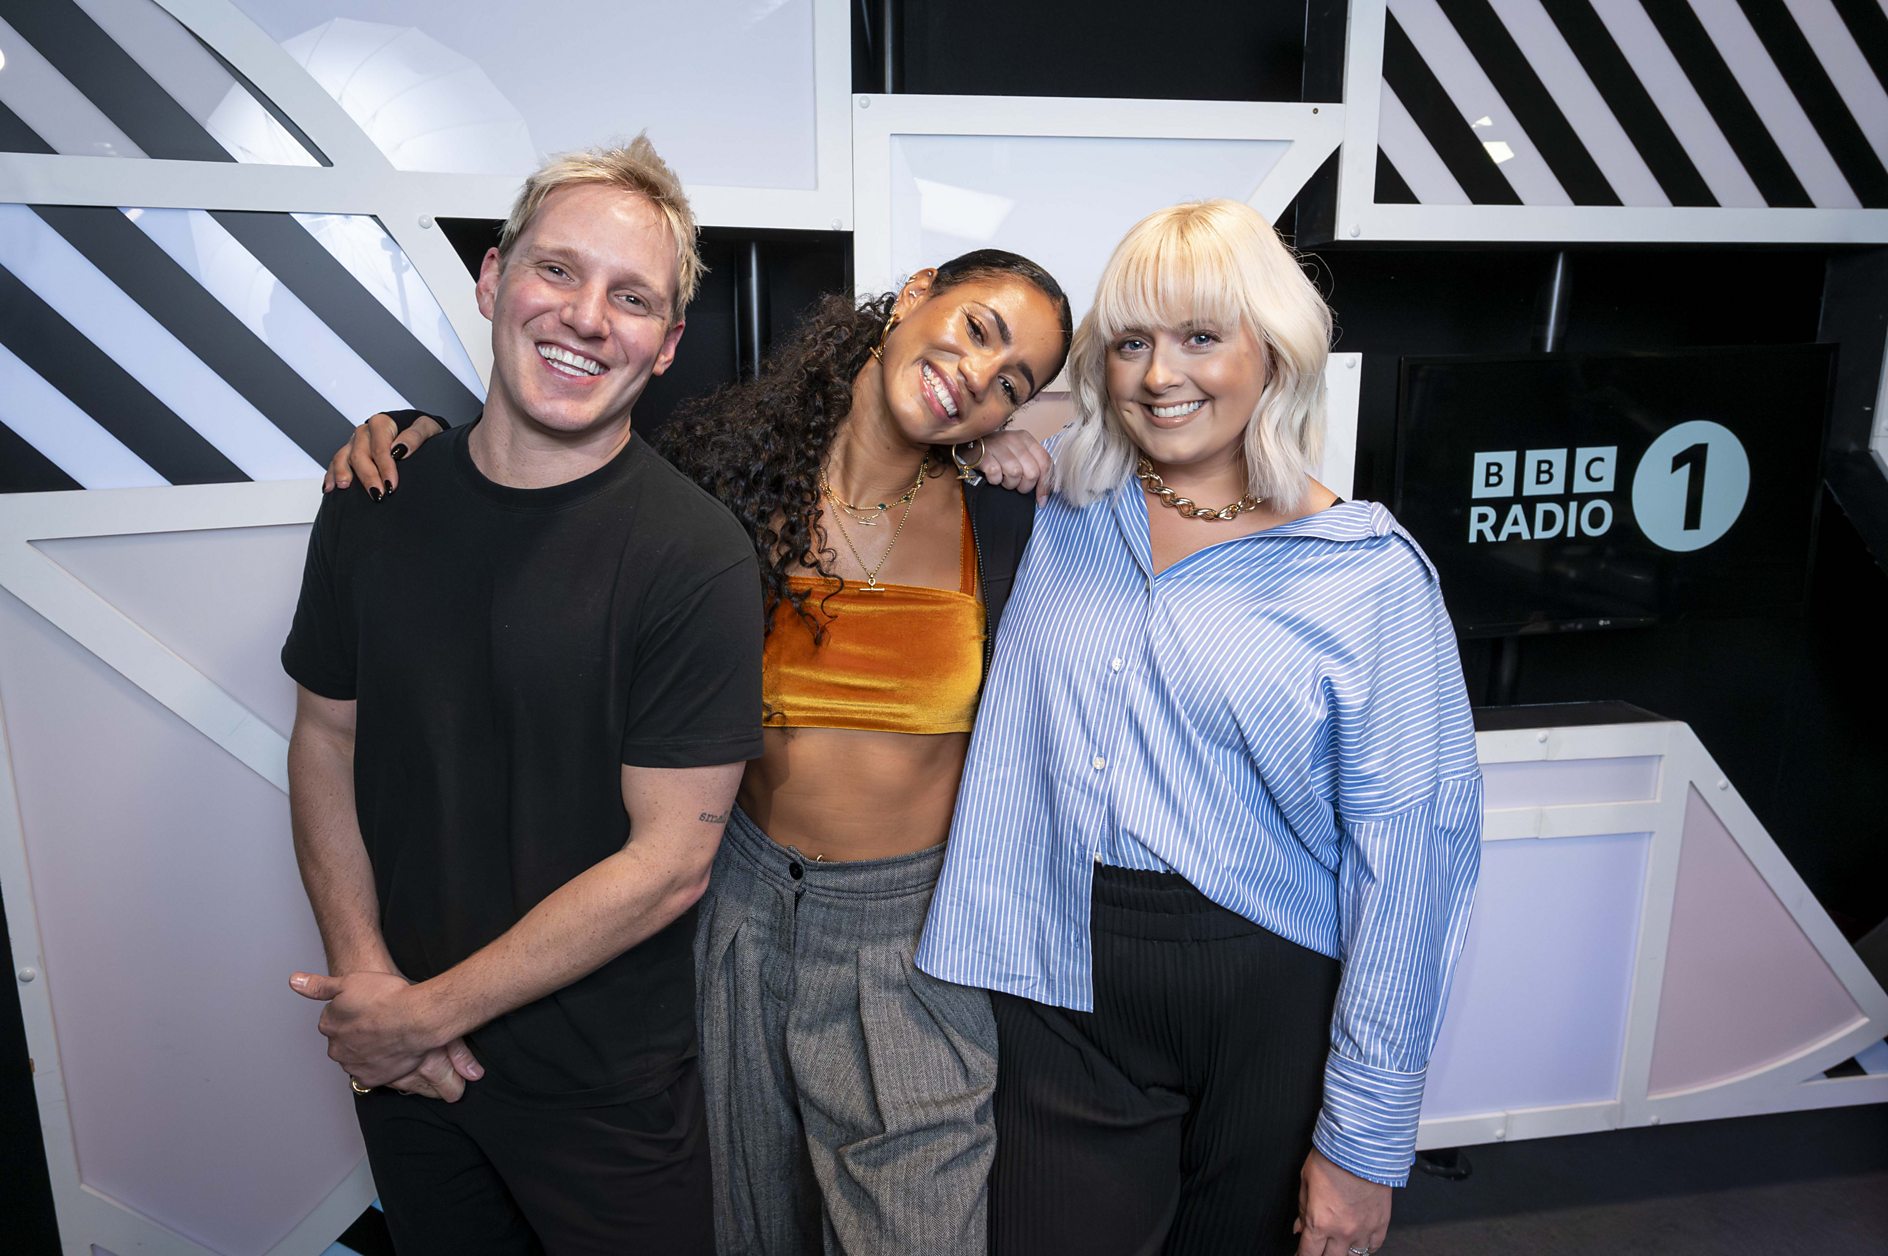 Katie Thistleton joins Vick Hope & Jamie Laing on Radio 1’s Drivetime Show from March 4